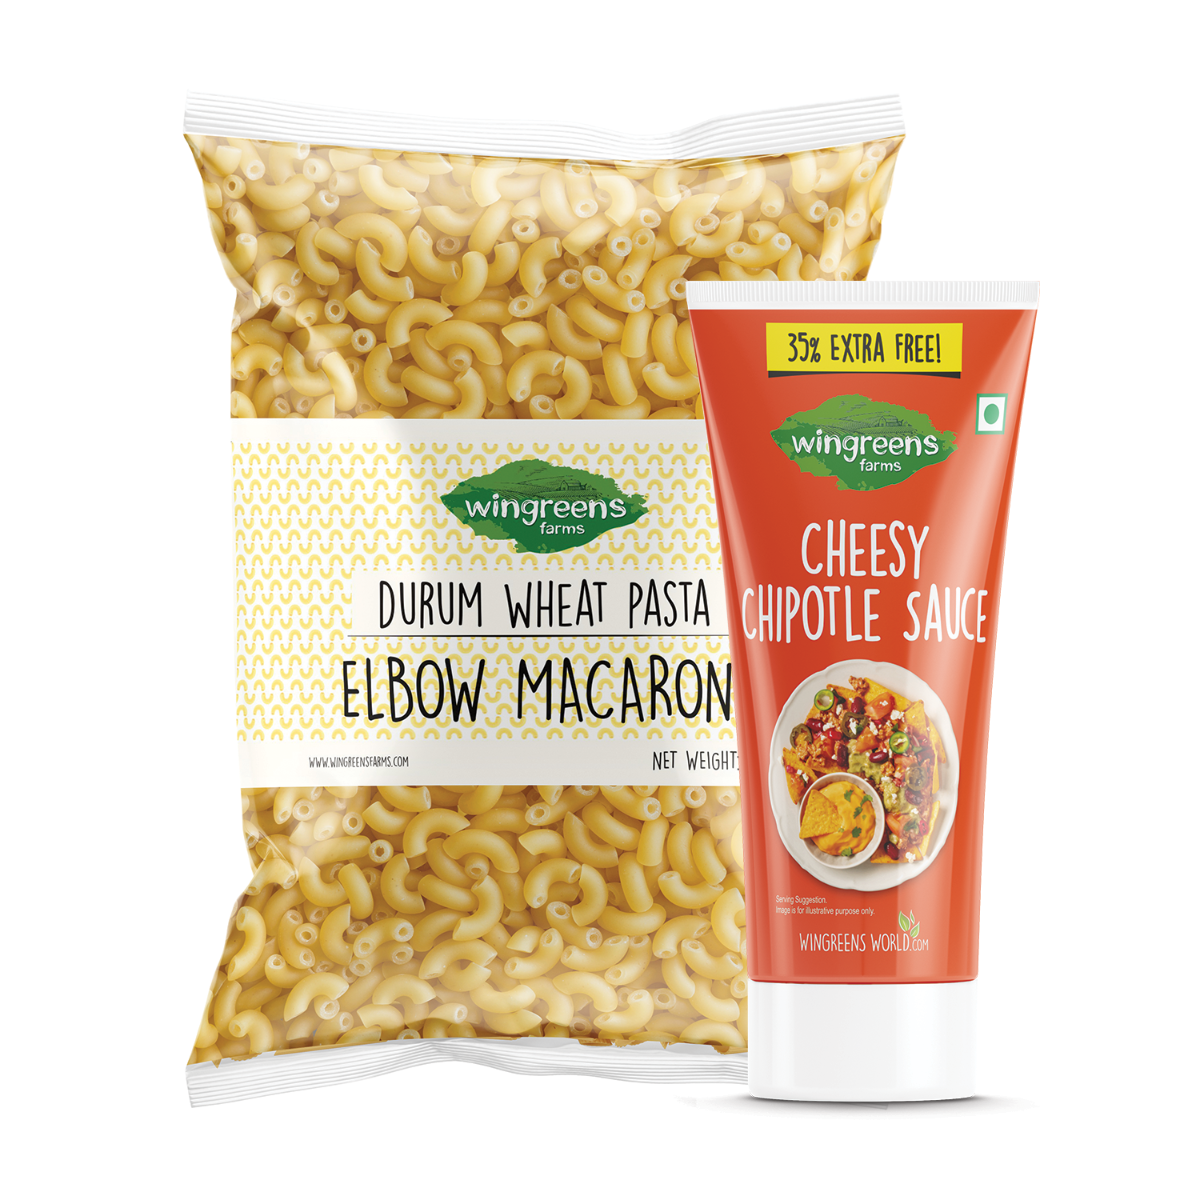 Elbow Macaroni (400g) with Cheesy Chipotle Sauce (180g)